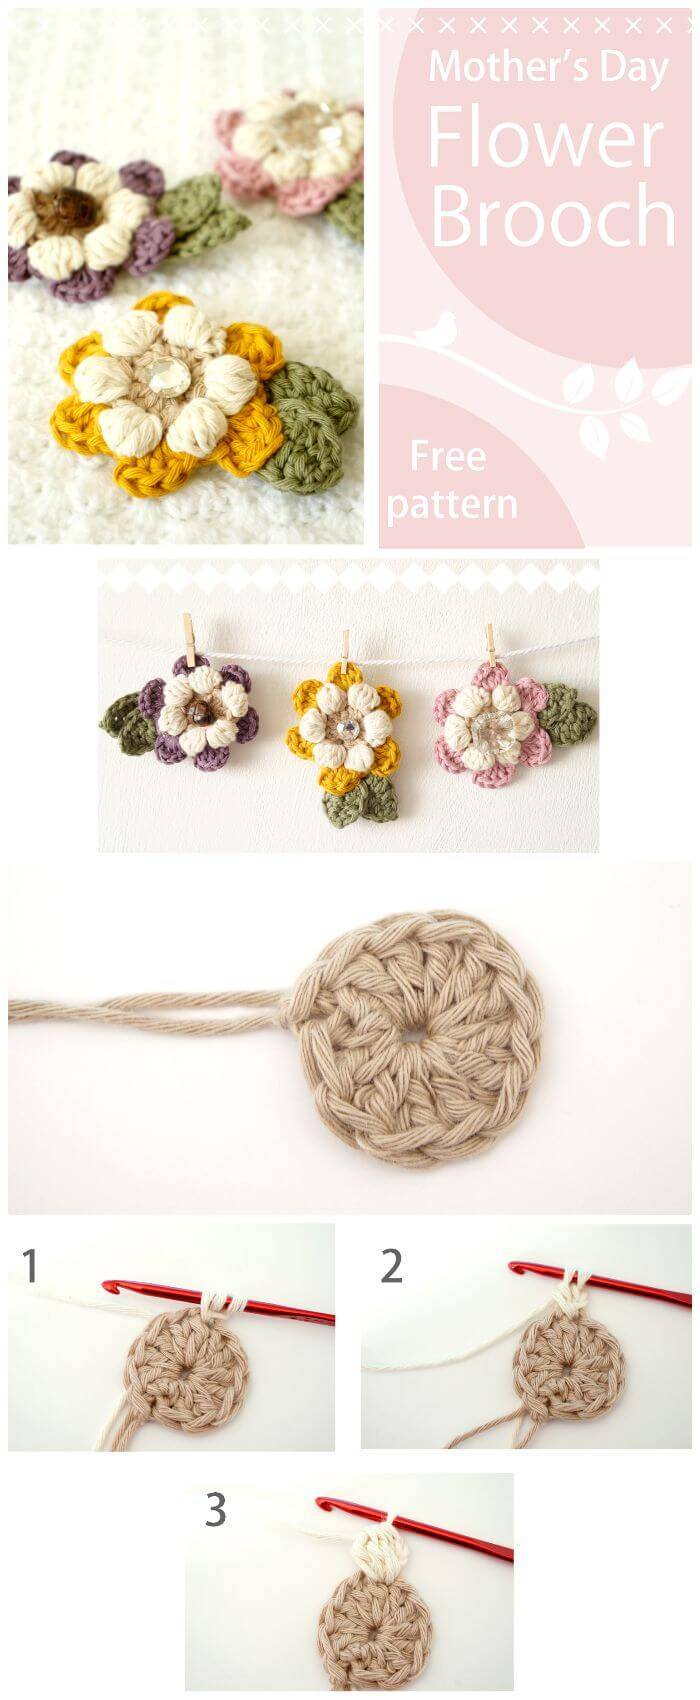 DIY Mother's Day Flower Brooch-Free Crochet Pattern, Crochet flowers with step-by-step instructions!